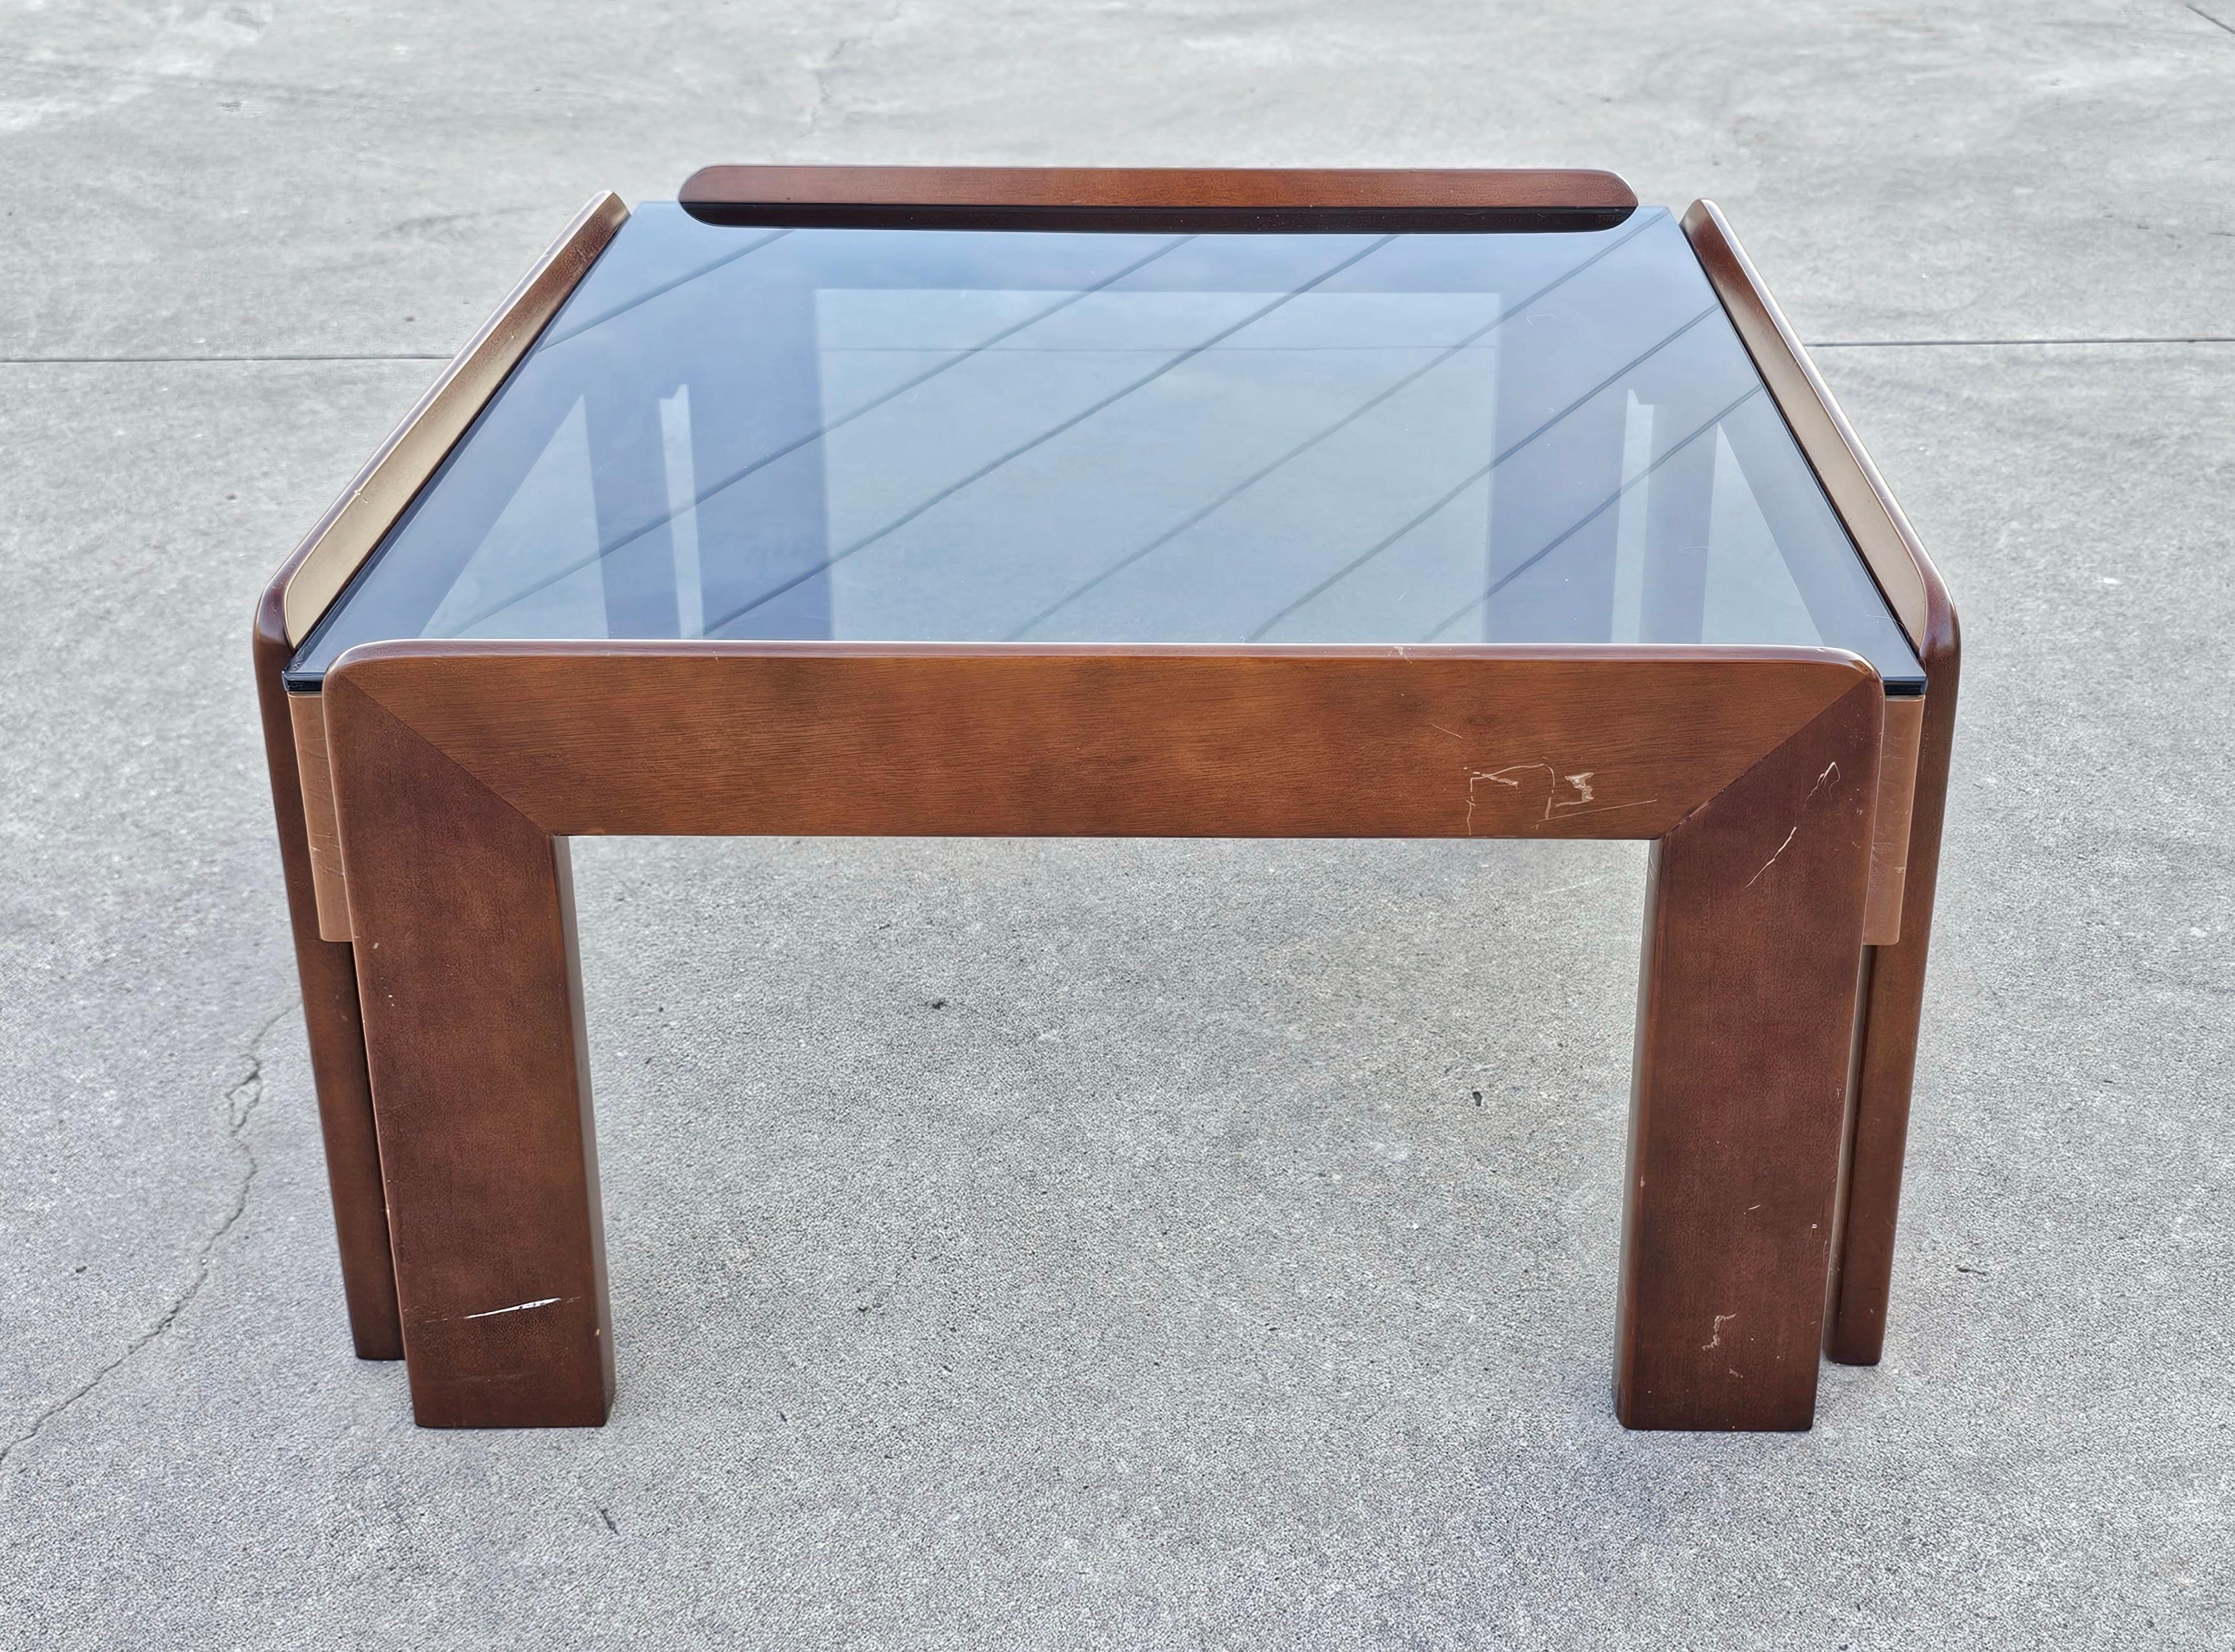 Smoked Glass MCM Coffee Table in Walnut and Smoke Glass by Afra and Tobia Scarpa, Italy 1960s For Sale